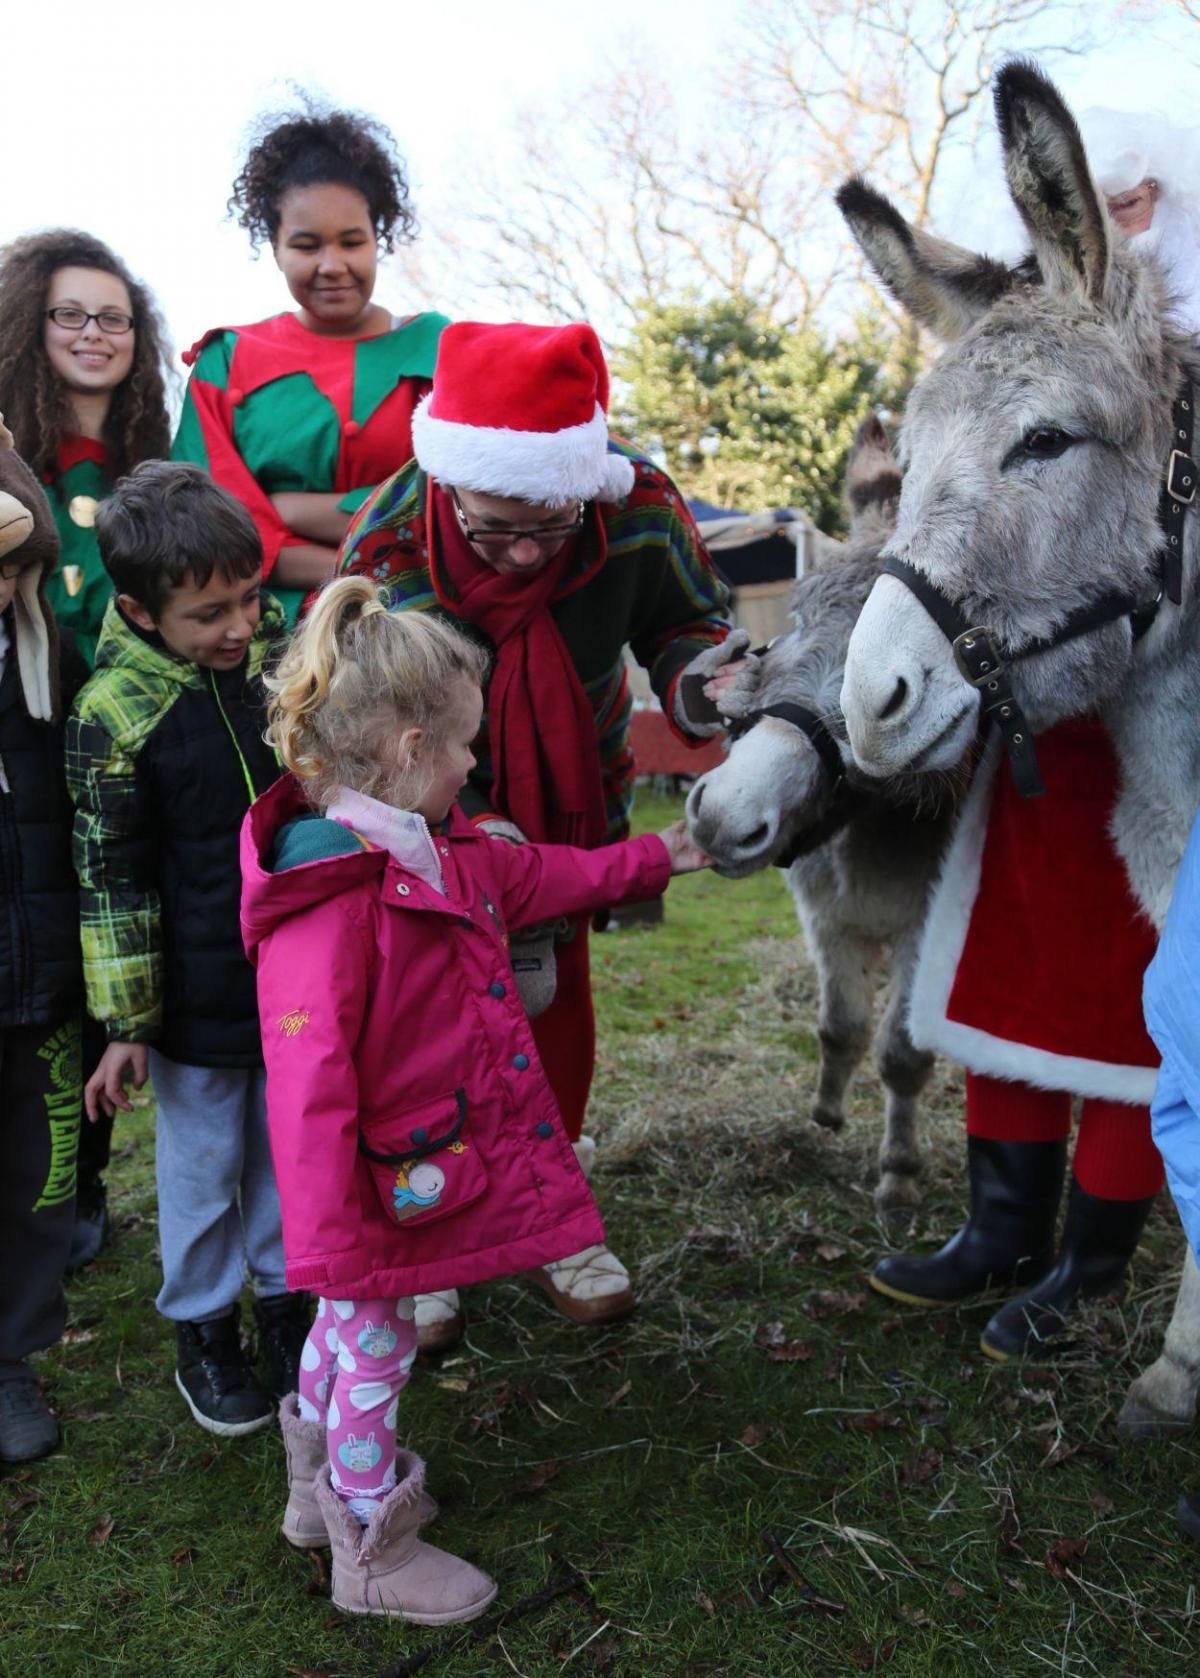 All our pictures from Southbourne's Christmas on the Green event